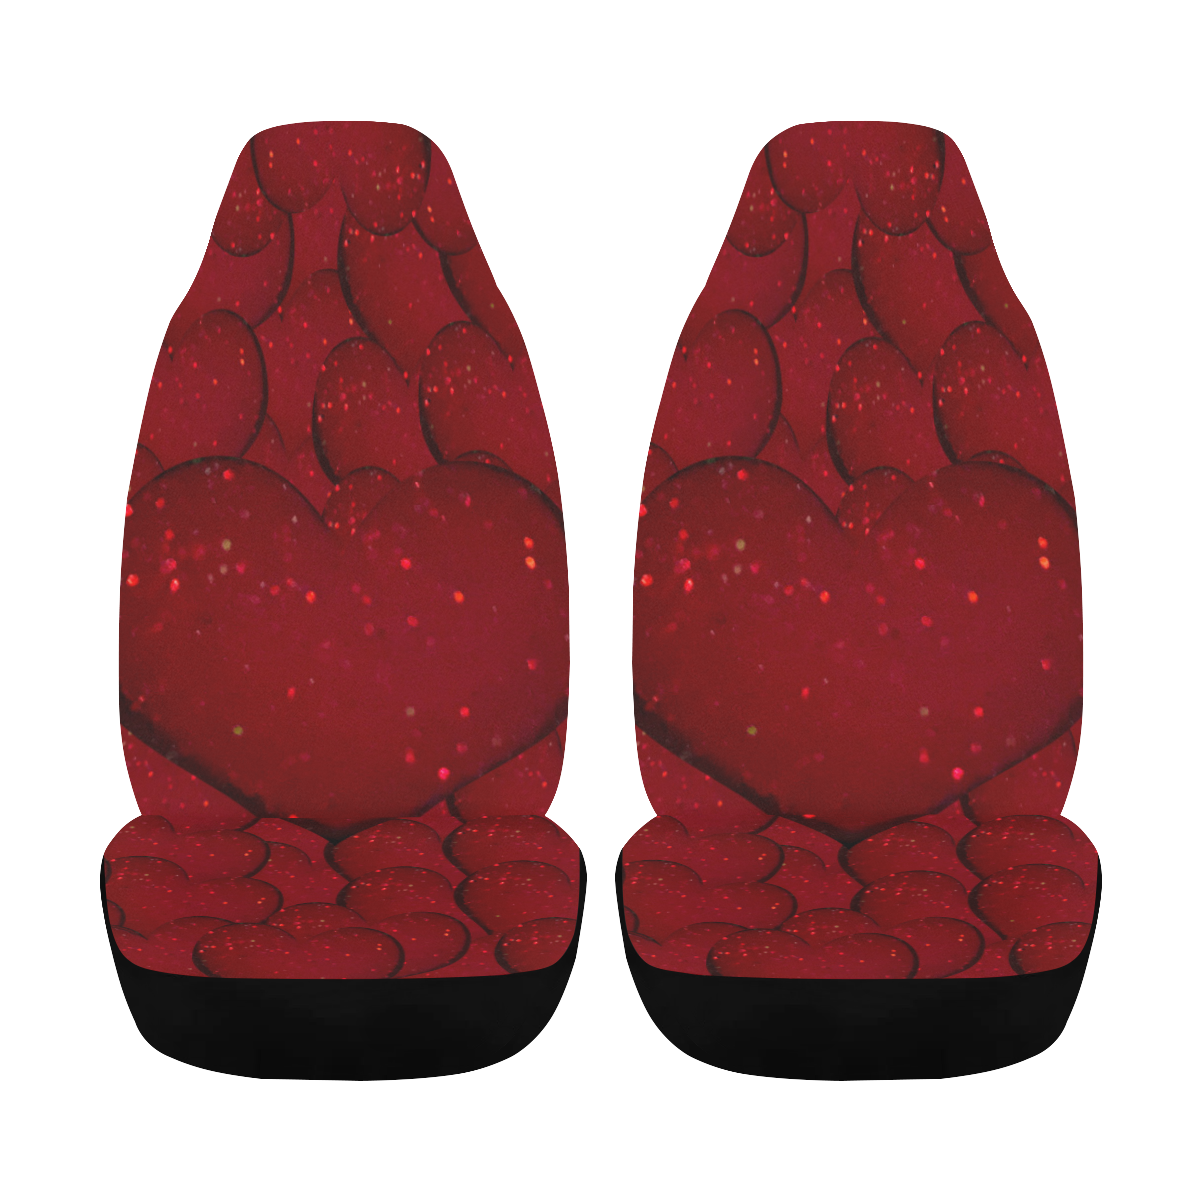 Sangria Hearts Car Seat Cover Airbag Compatible (Set of 2)